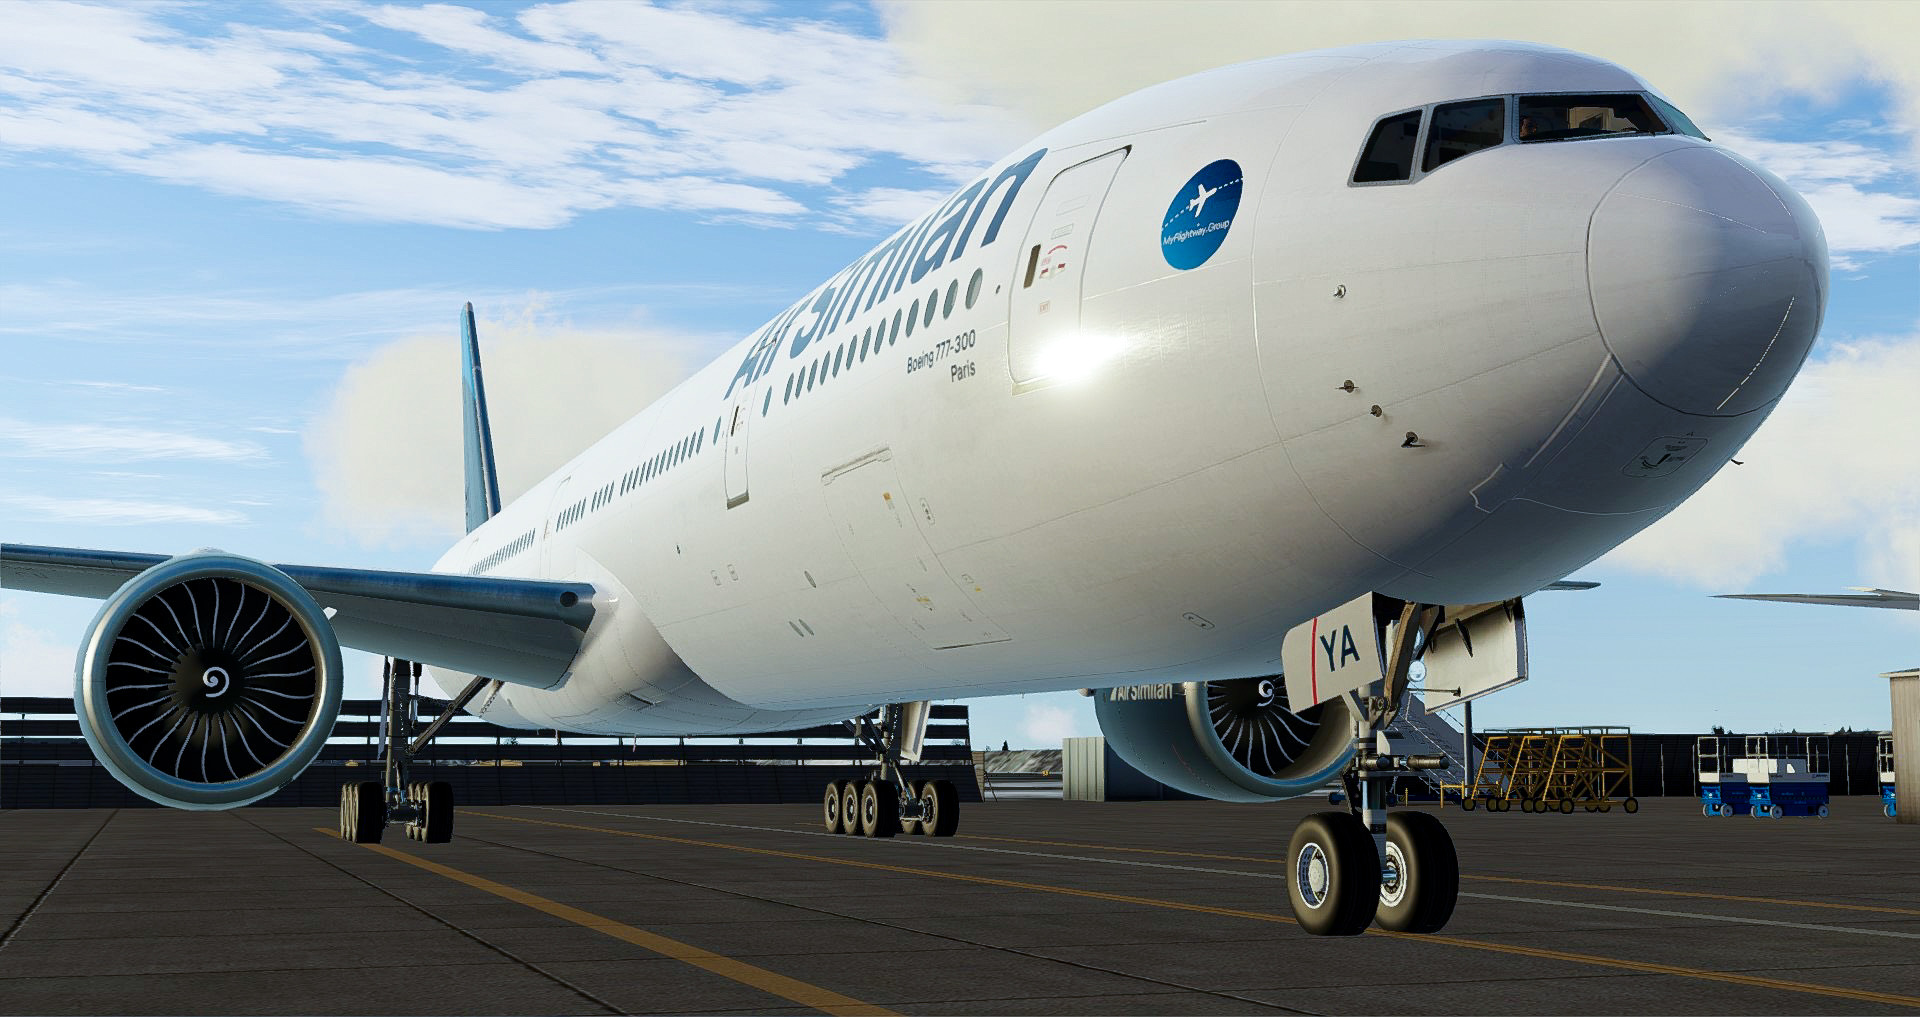 Welcome to the Boeing 777 and long-haul